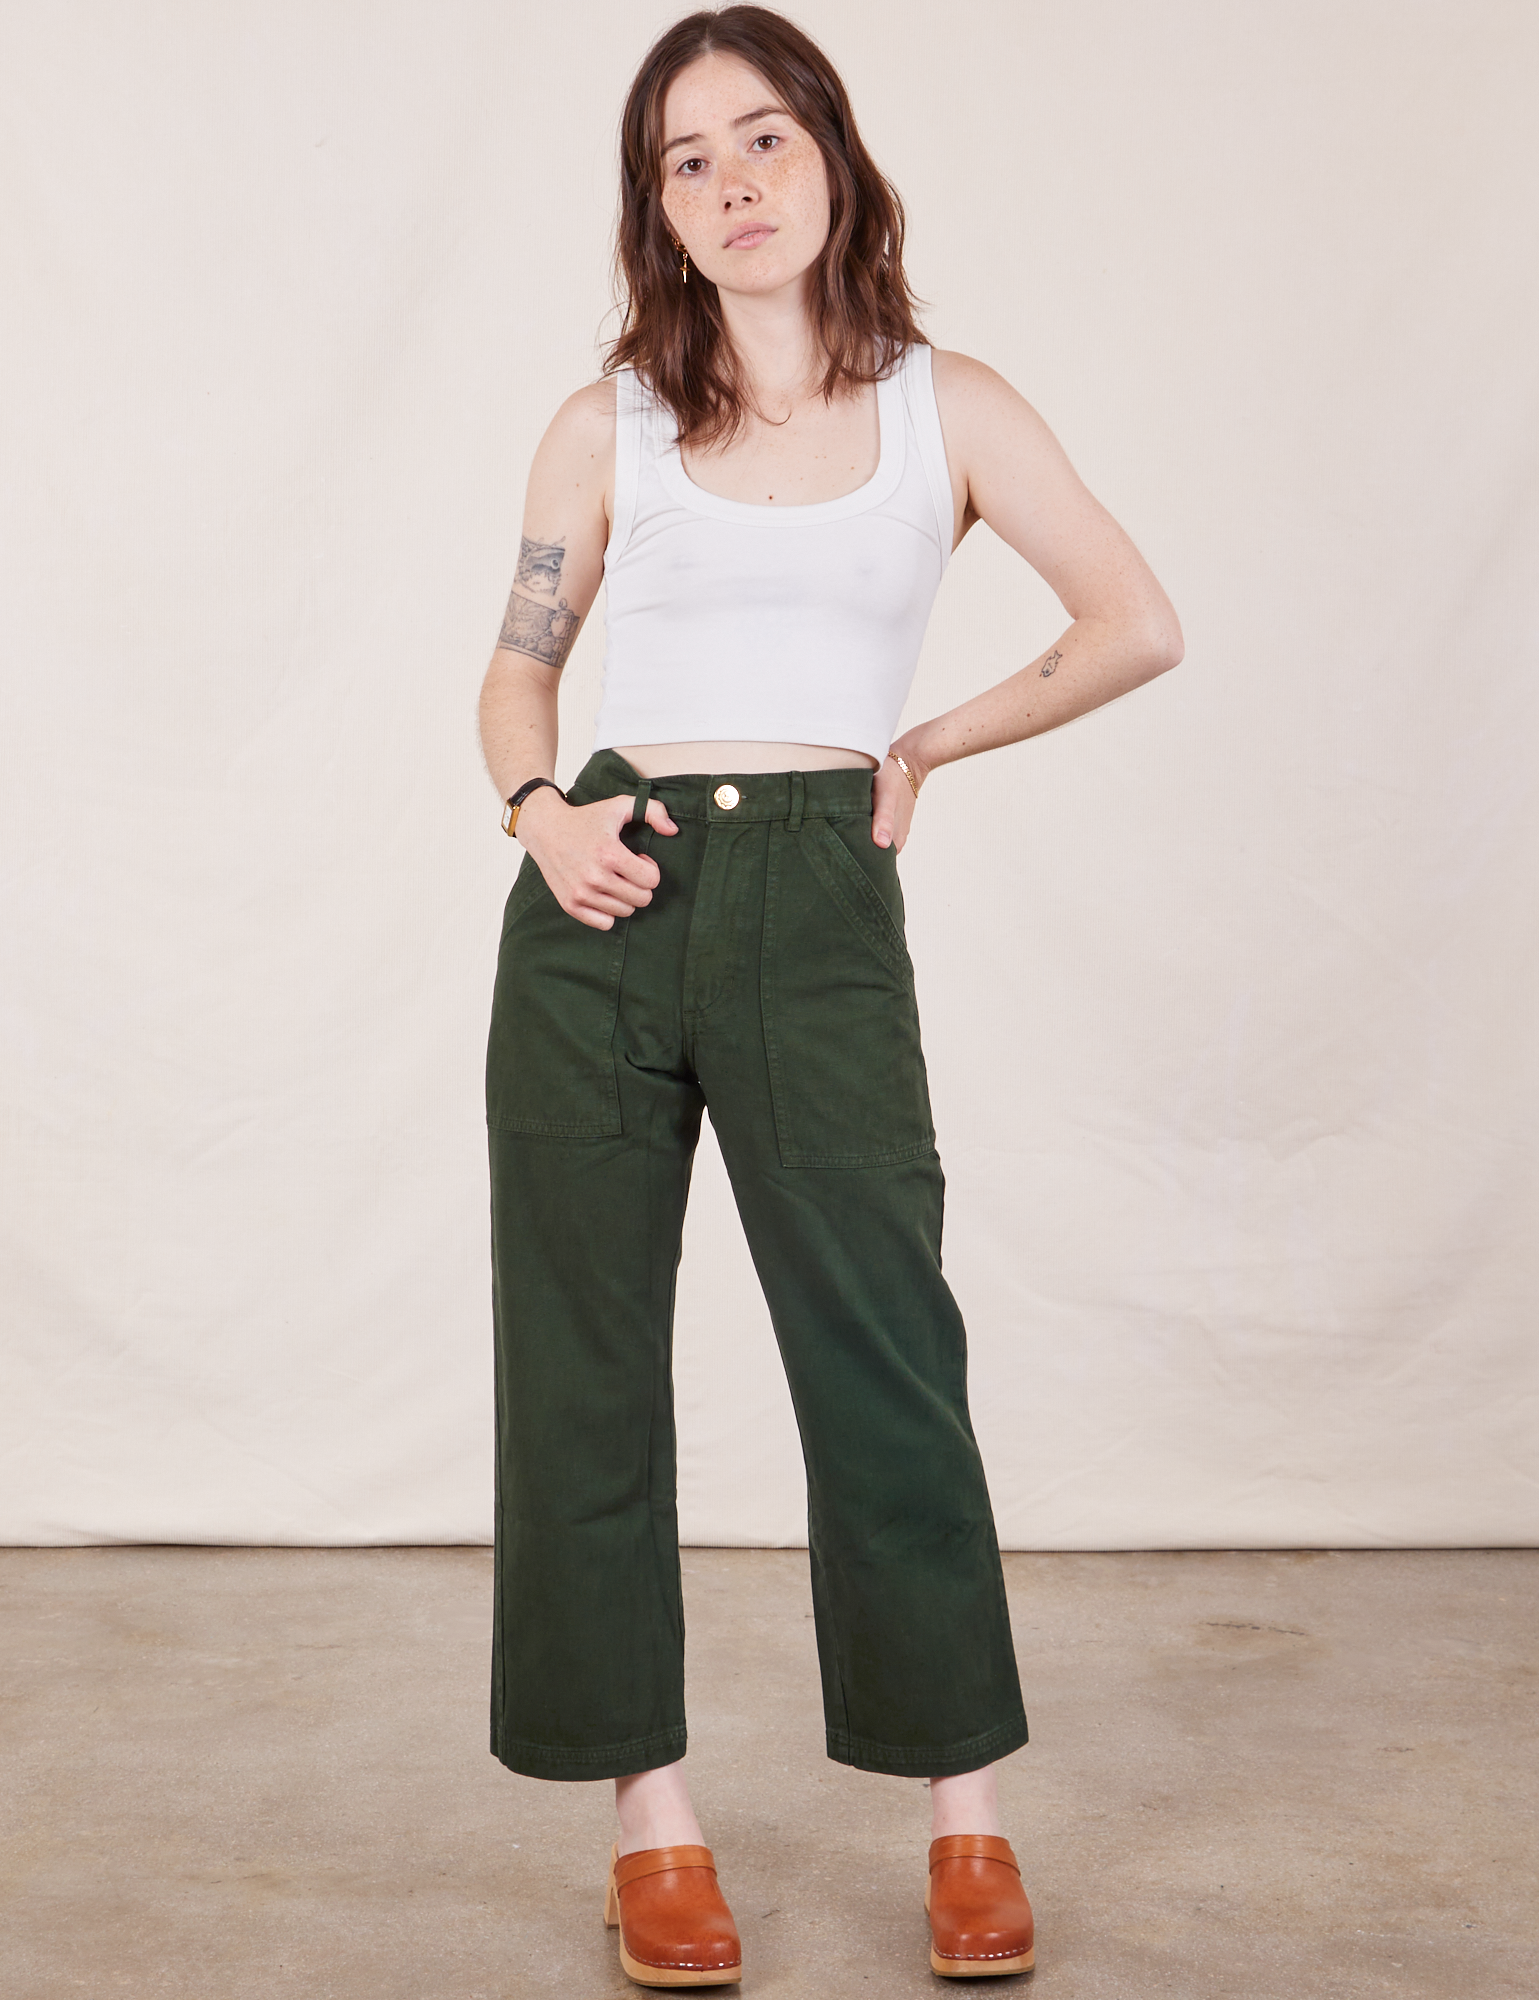 Hana is 5&#39;3&quot; and wearing XXS Petite Work Pants in Swamp Green paired with Cropped Tank Top in vintage tee off-white